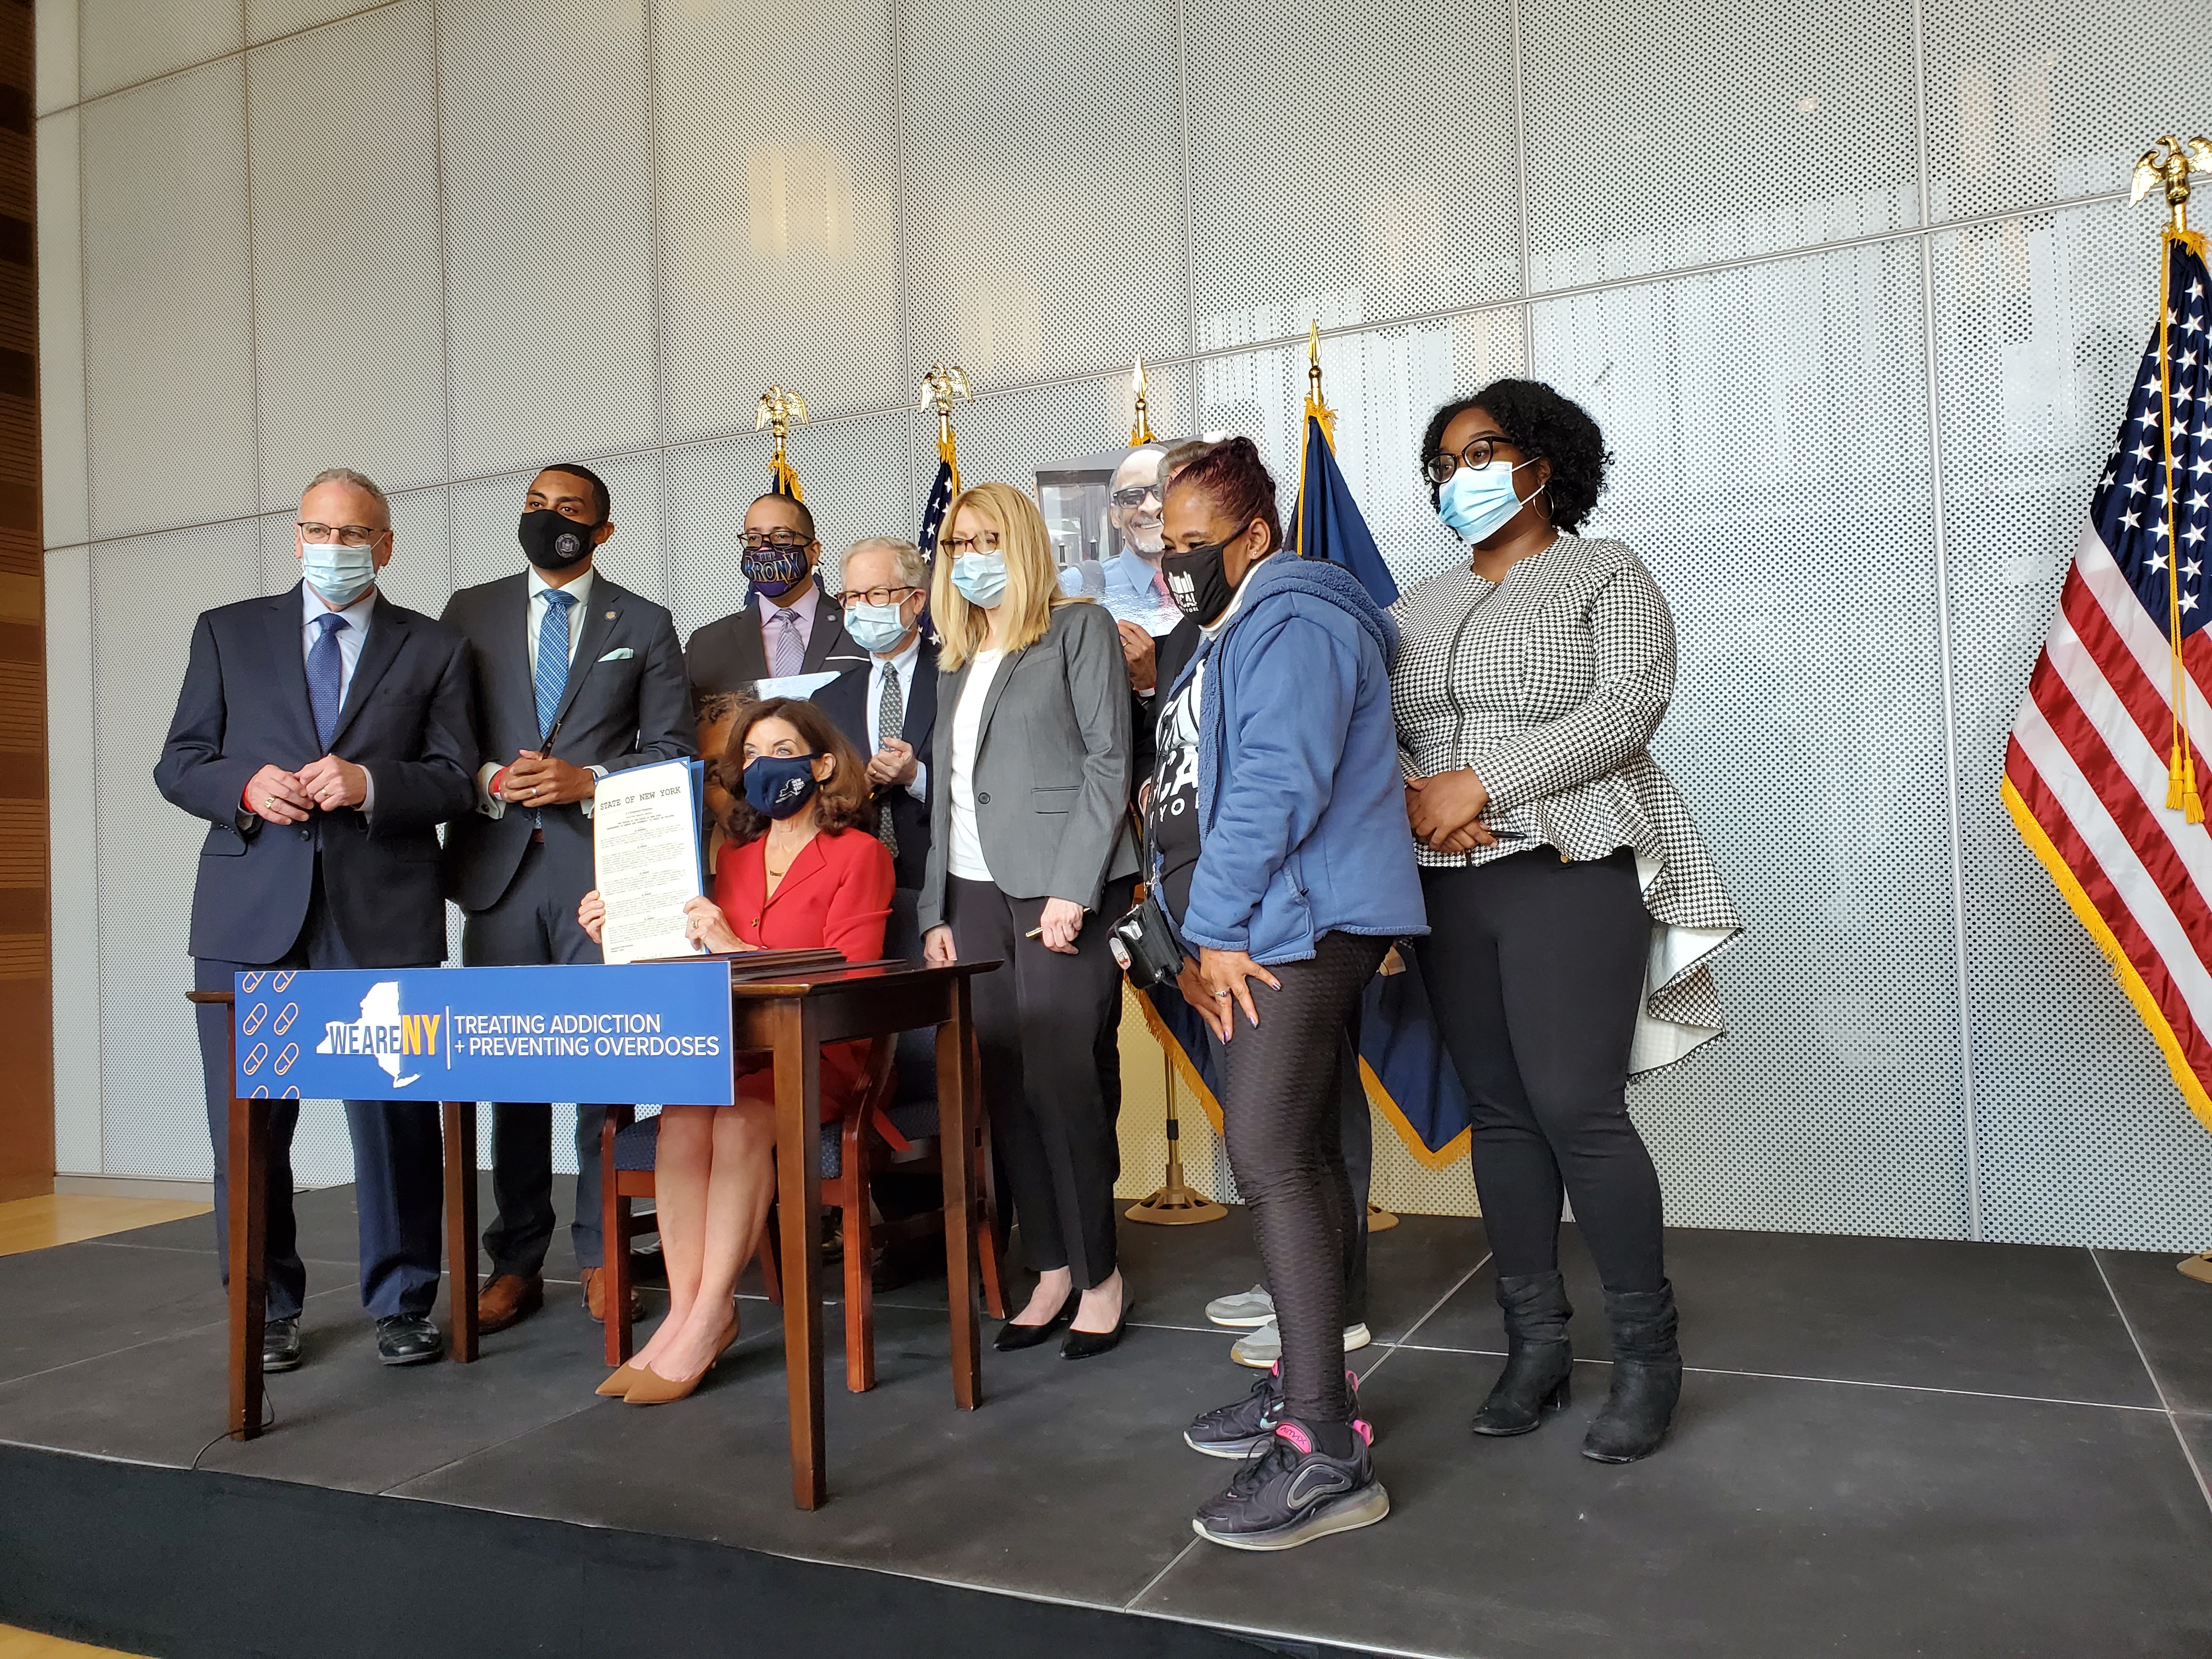 Bill signing ceremony with Governor Hochul and state legislators at John Jay College